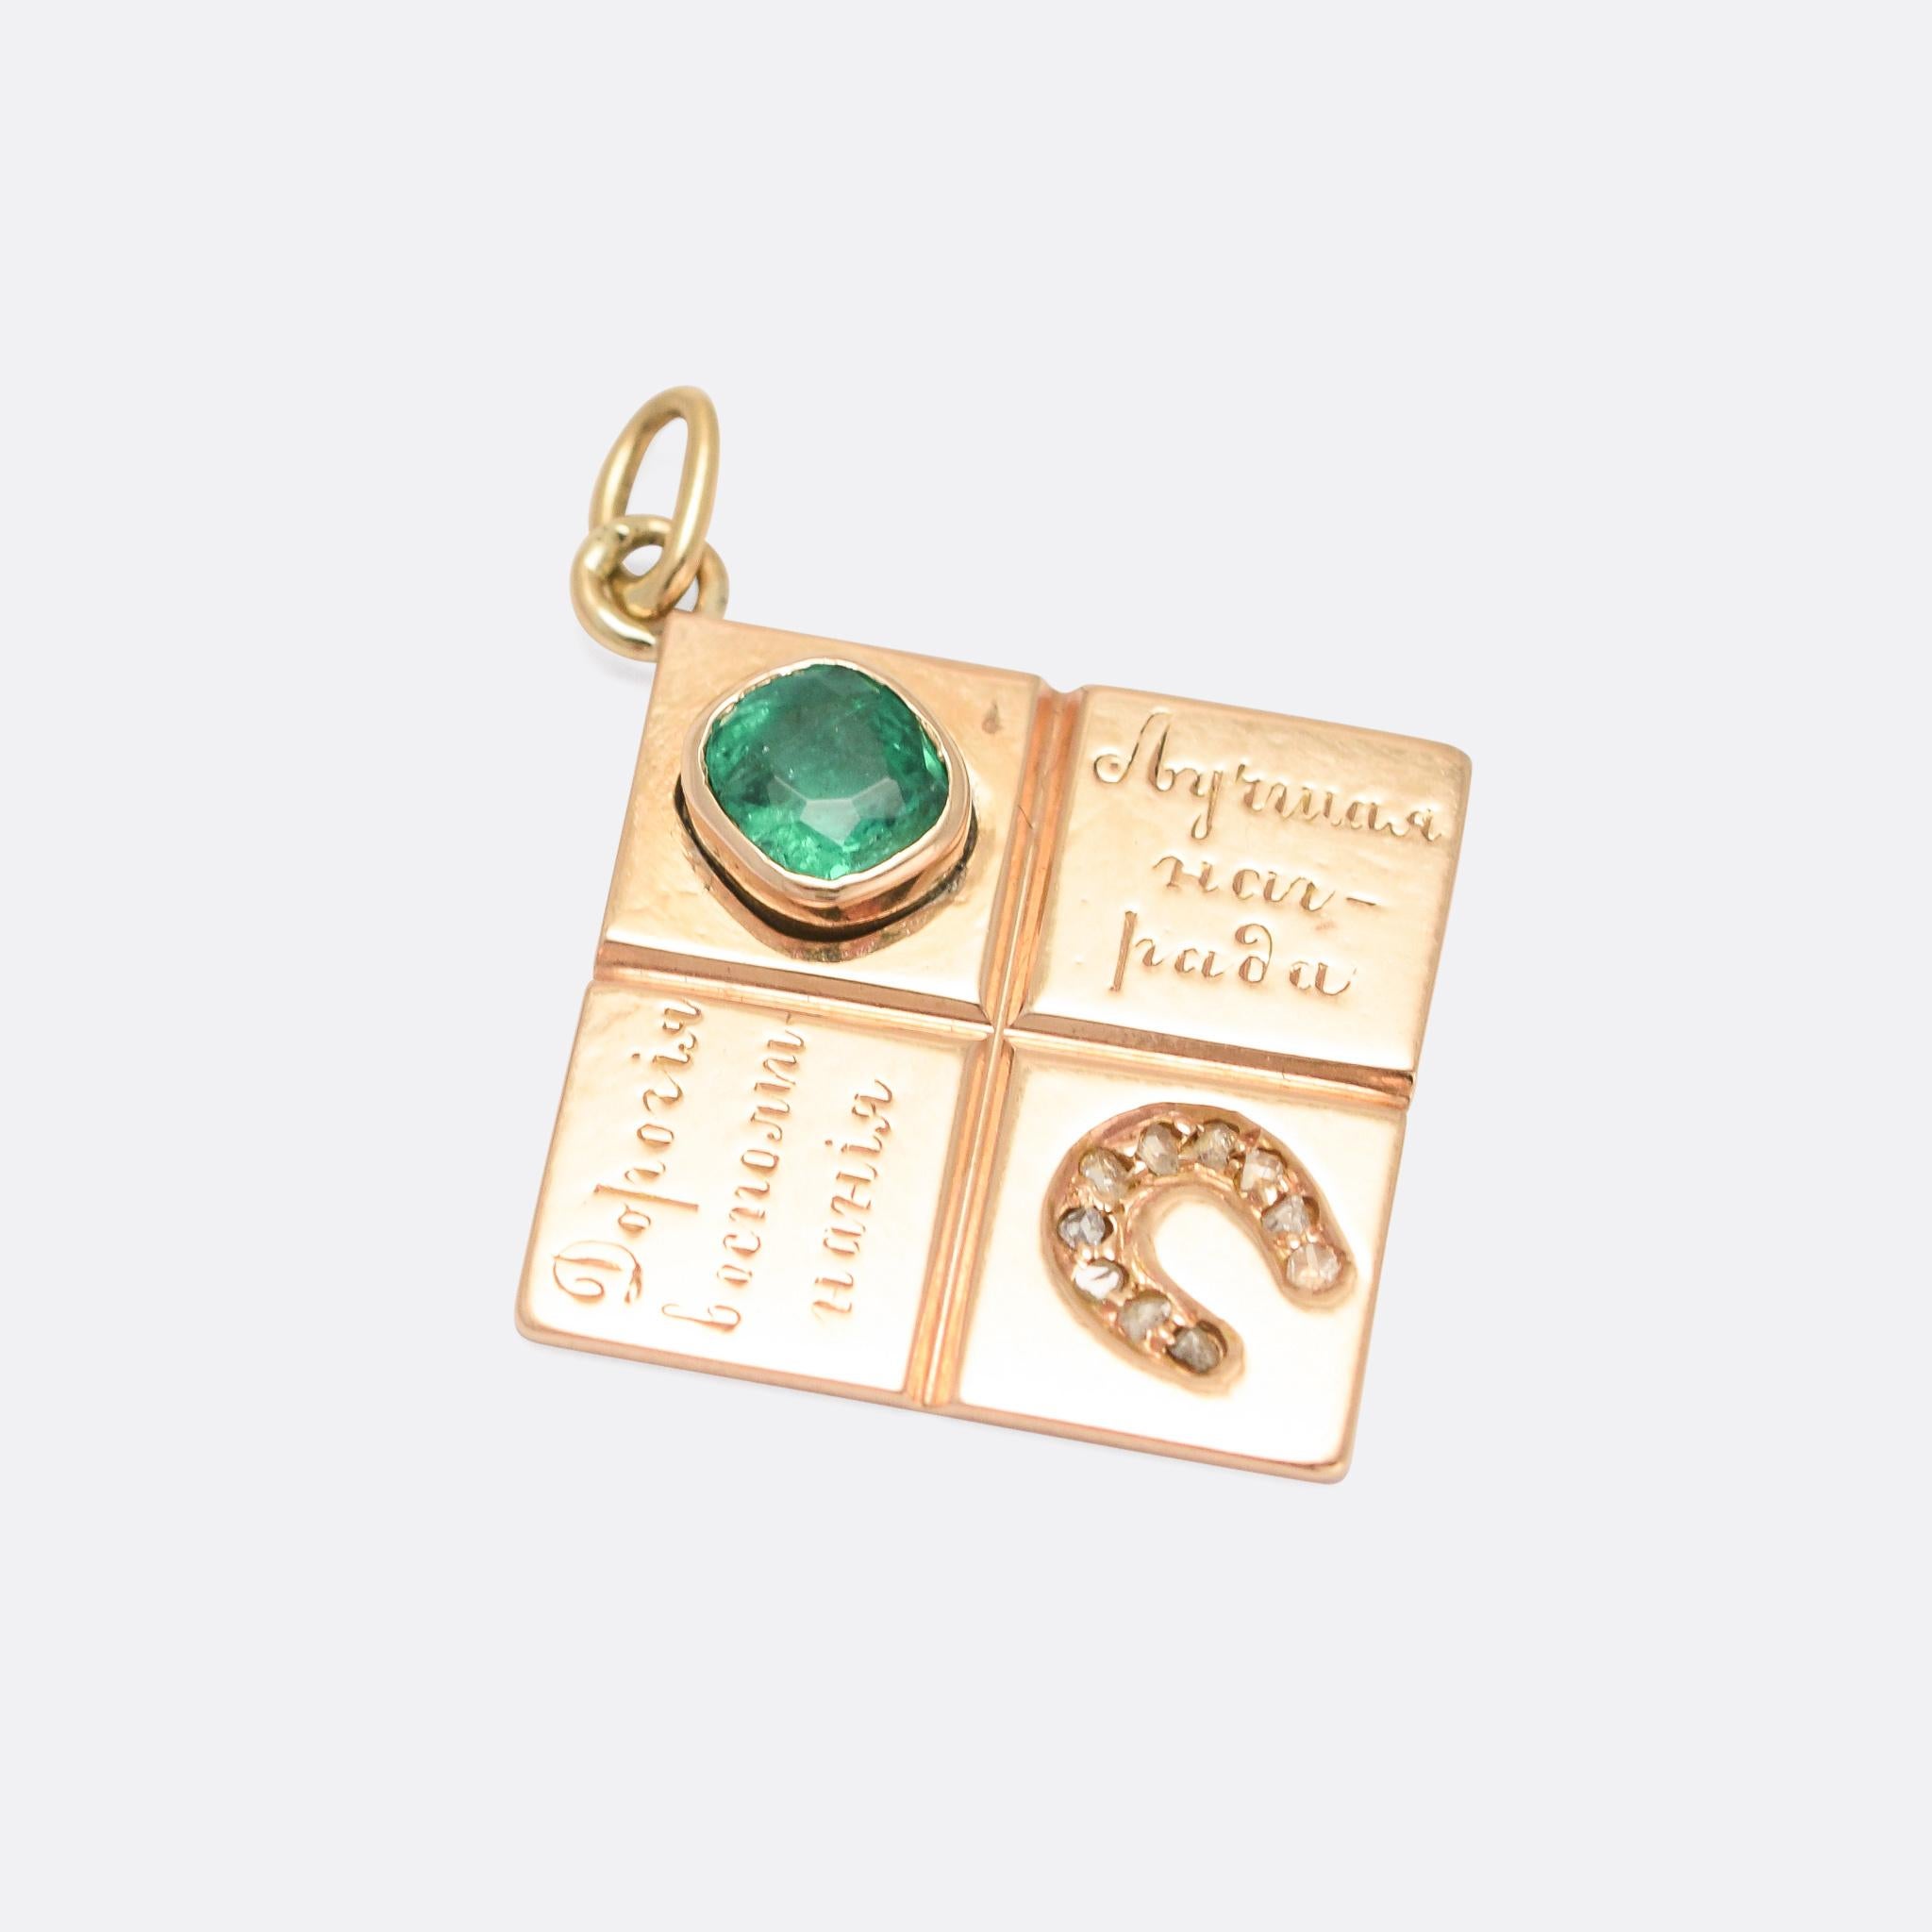 A cool antique Russian lucky charm with four offset square panels: a diamond horseshoe, a vibrant green emerald, and two with Russian text. It's crafted in 14 karat yellow gold, with pre-revolution St Petersburg assay marks. The script is an old